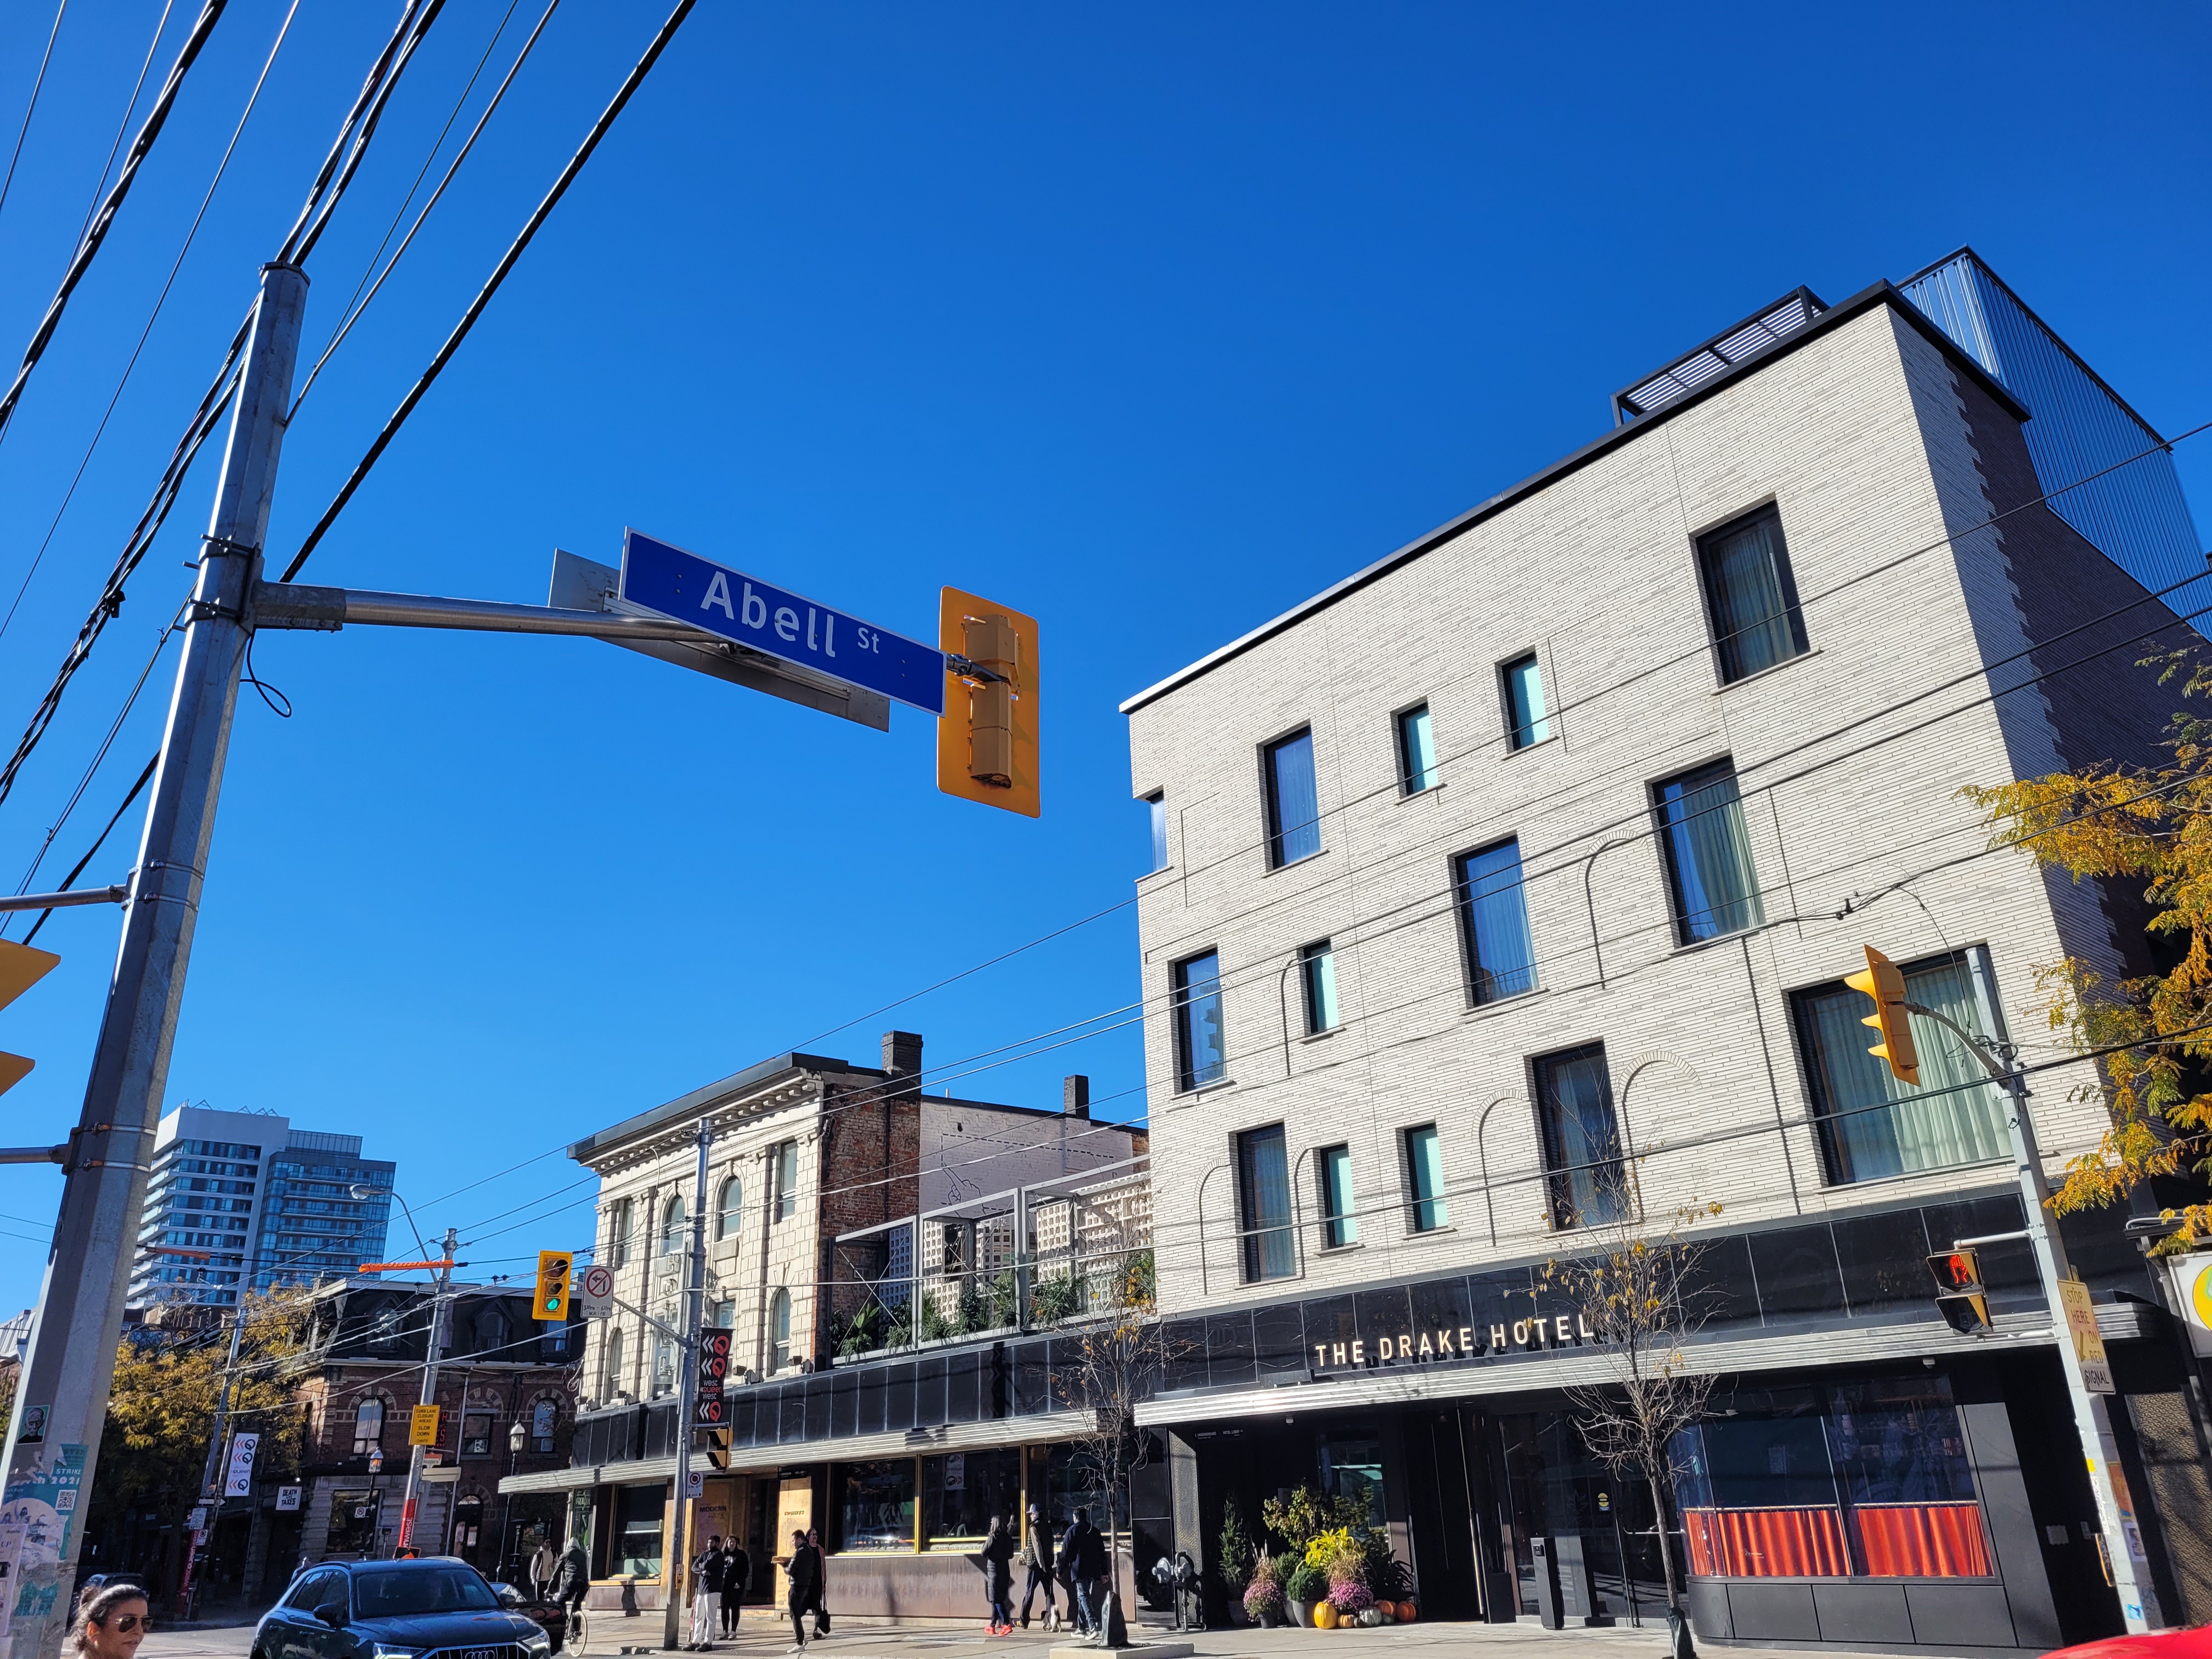 Queen Street West is one of the very best things to do in Toronto